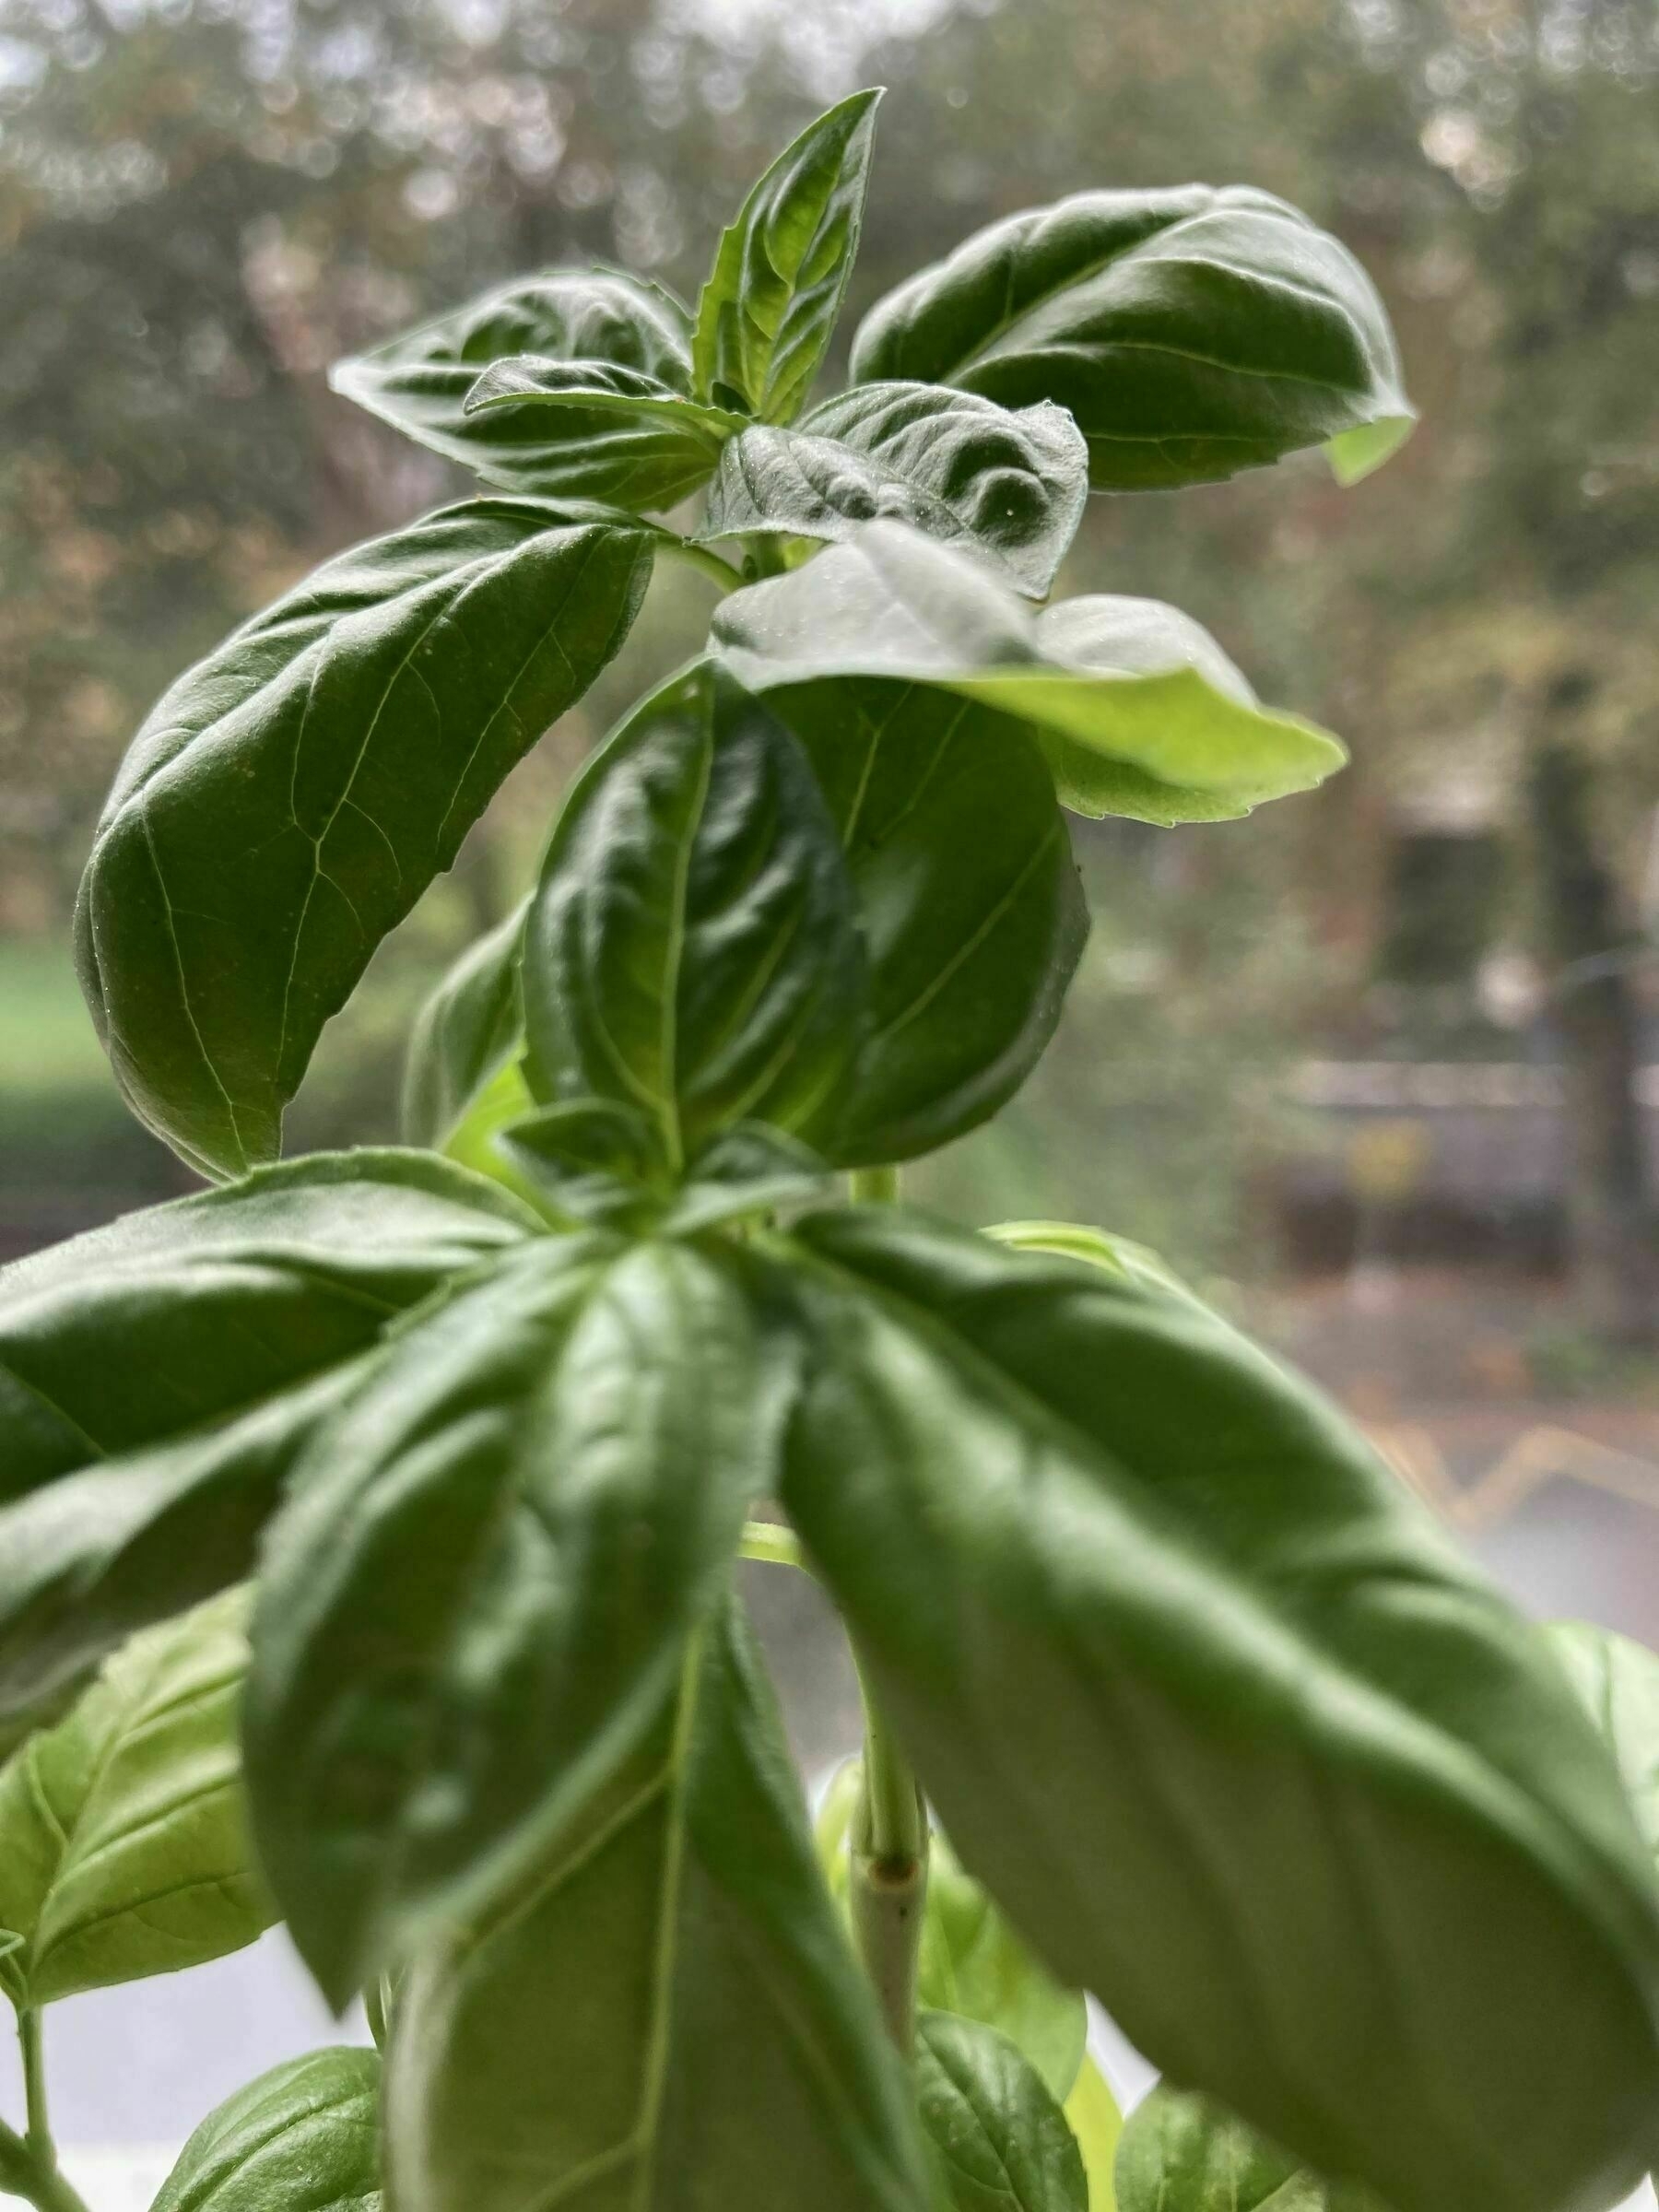 The leaves of a basil plant.